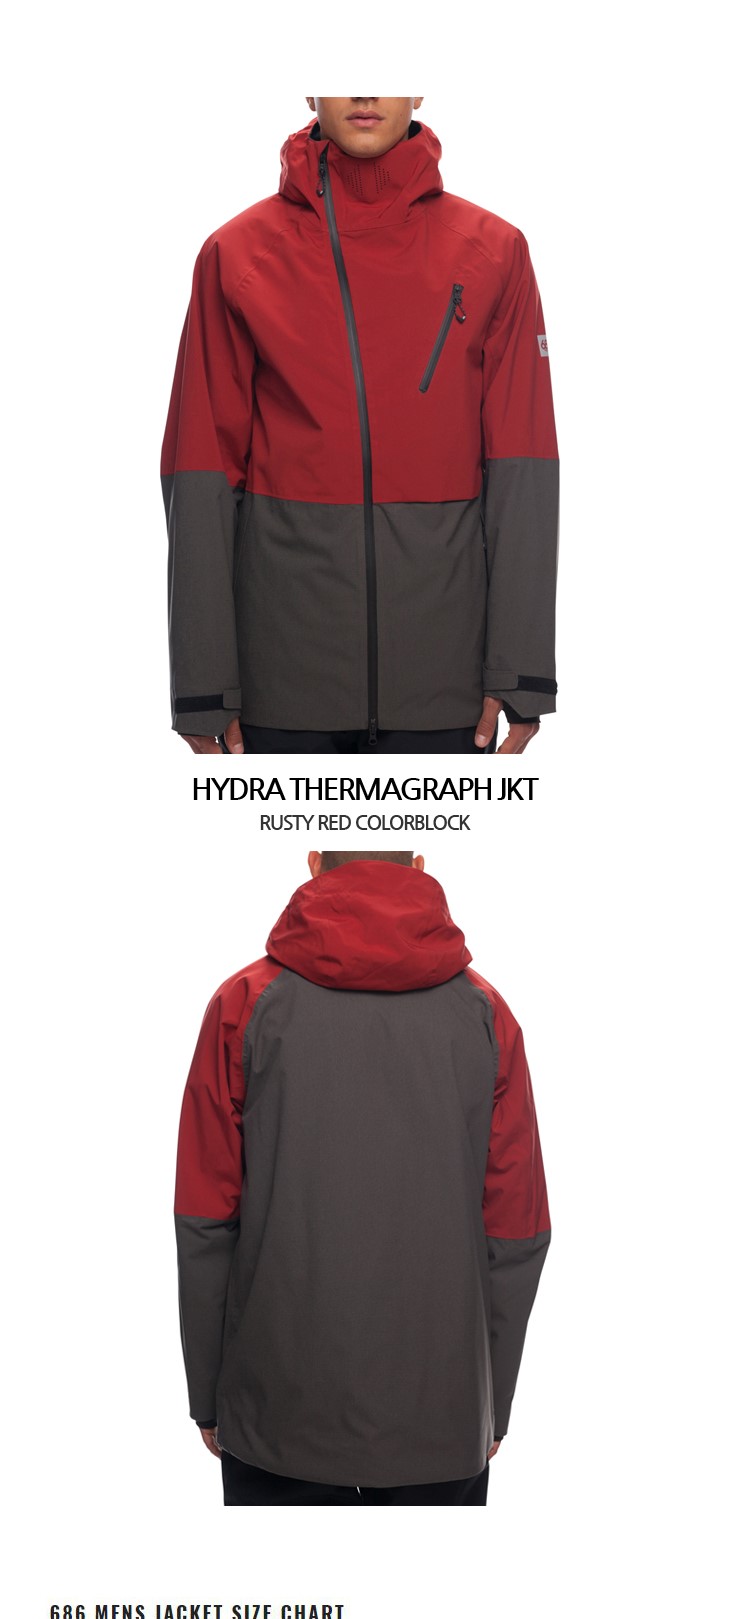 Hydra_Thermagraph_jkt_rusty_red_d (2).jpg